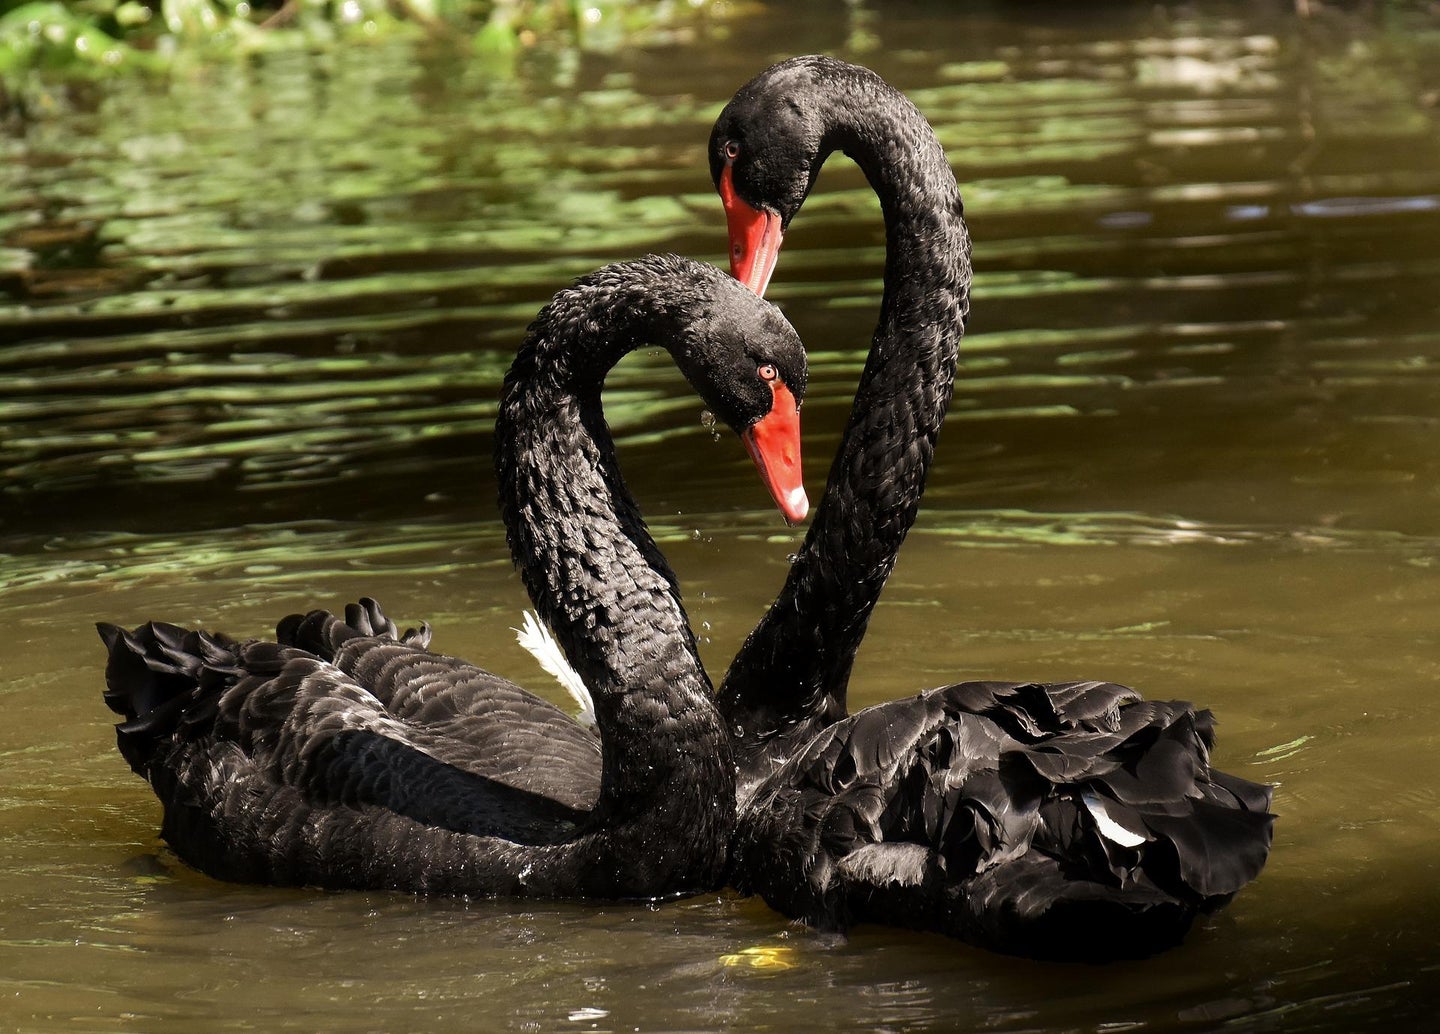 two black swans swimming in a pond